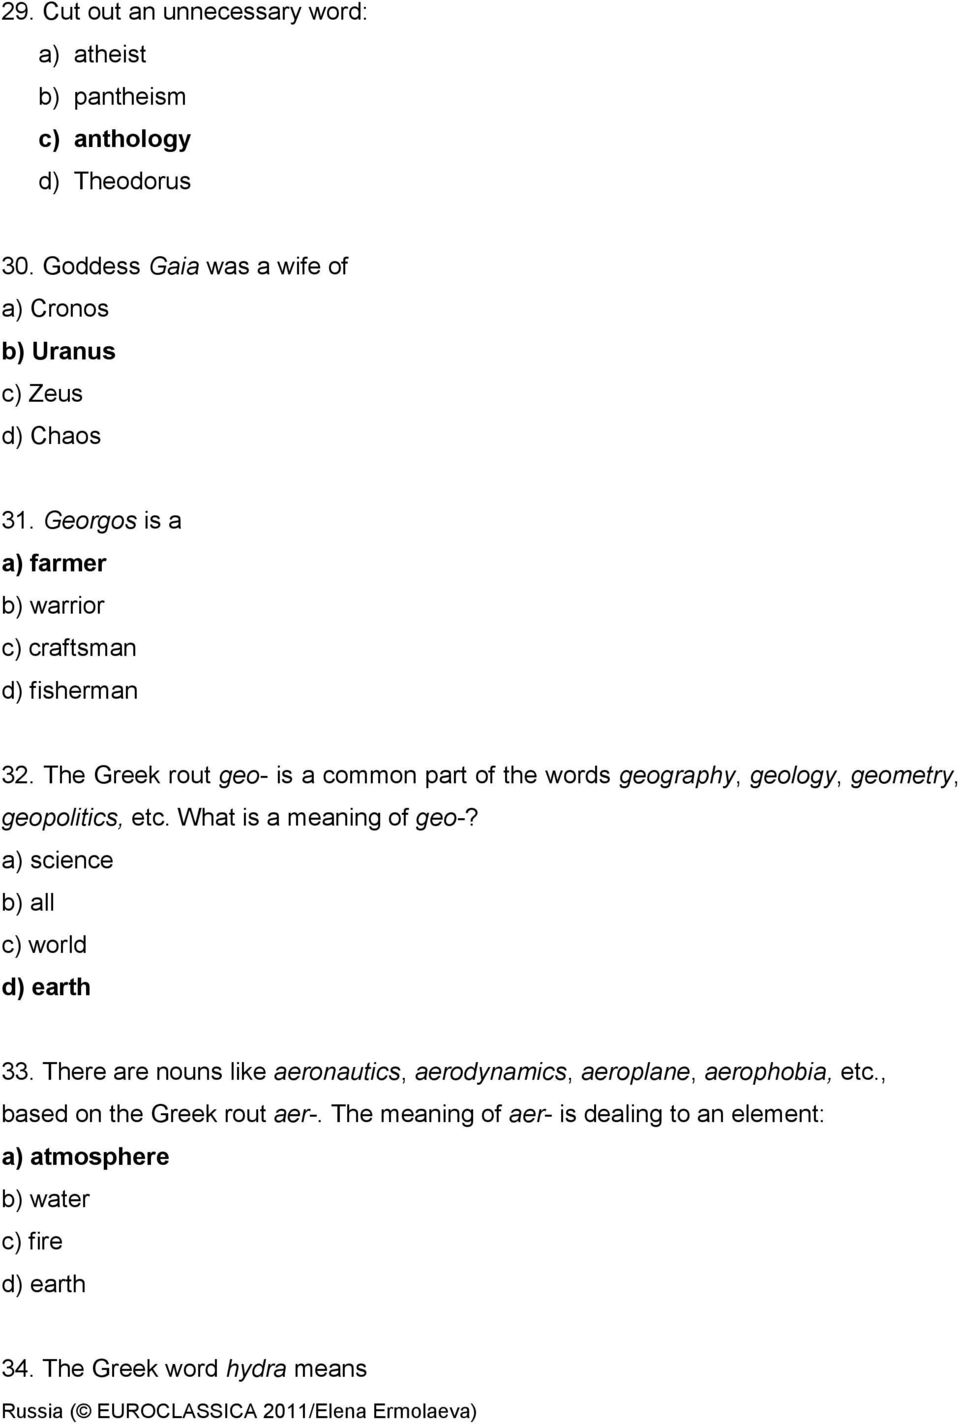 The Greek rout geo- is a common part of the words geography, geology, geometry, geopolitics, etc. What is a meaning of geo-?